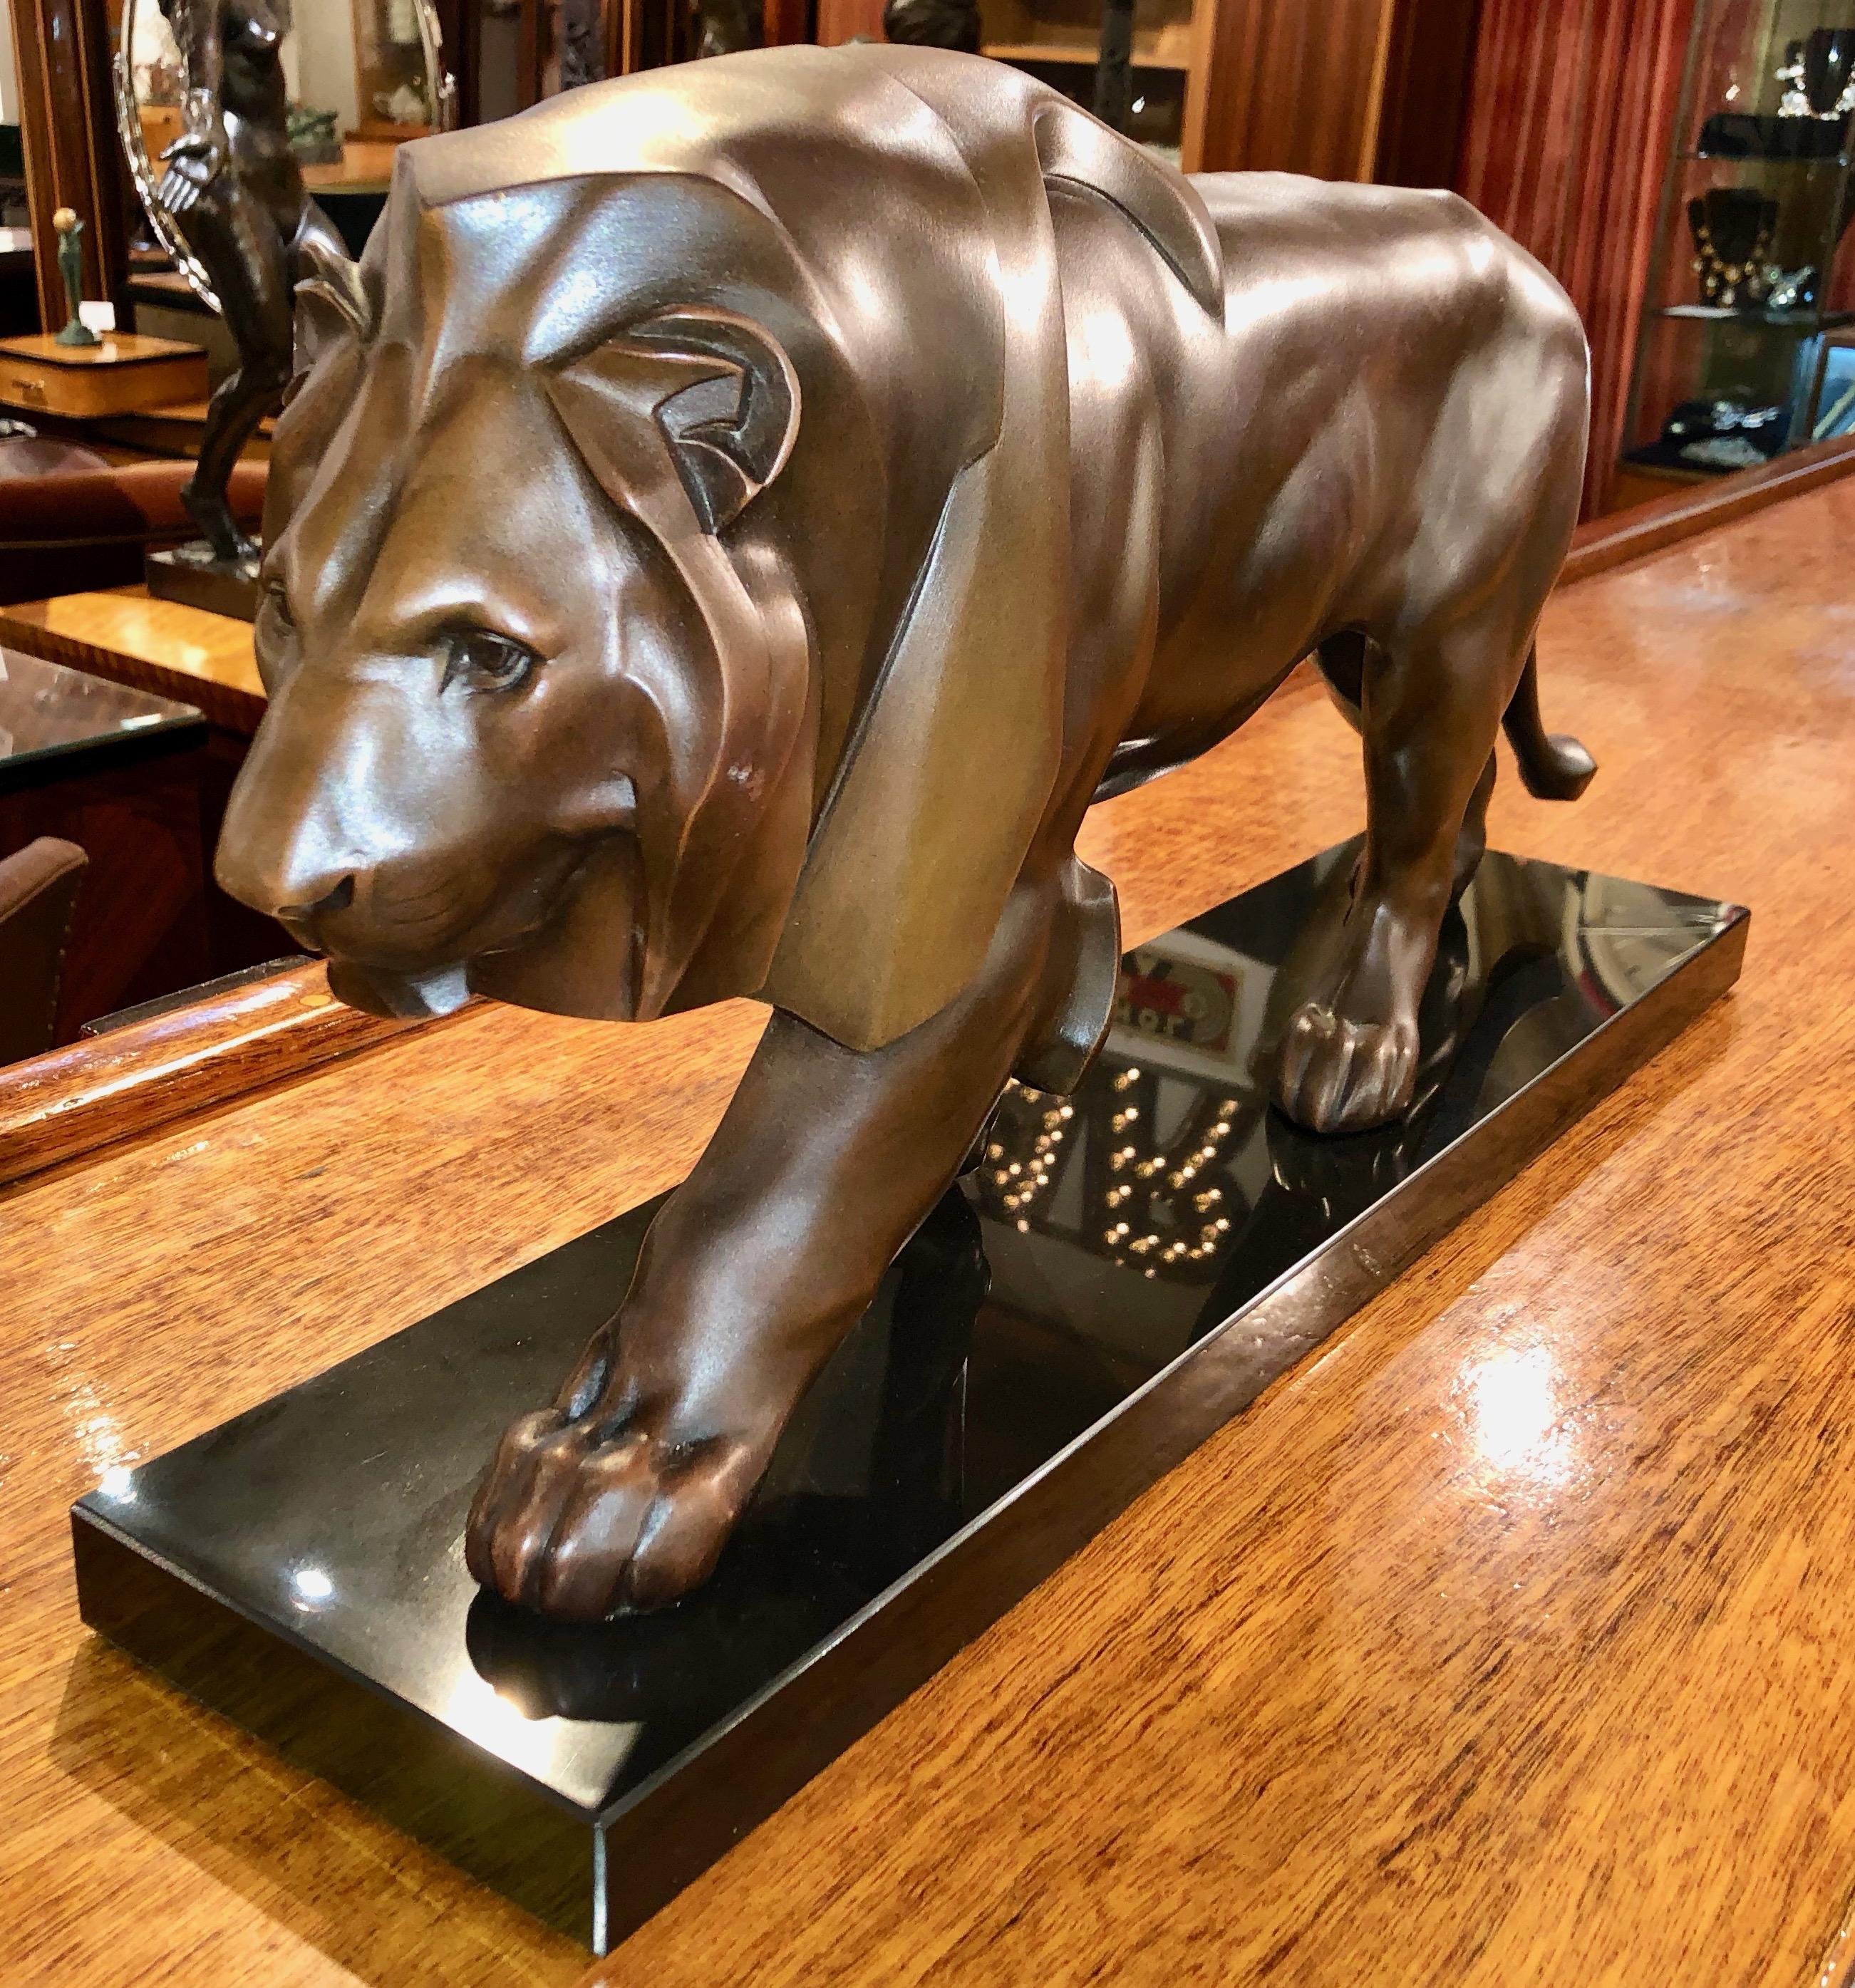 Art Deco sculpture of a walking lion by the famous French sculptor Max Le Verrier. Art metal of the highest quality with beautiful dark brown/bronze patina on a Belgian black marble base. Very impressive original statue from France circa 1920/1930.